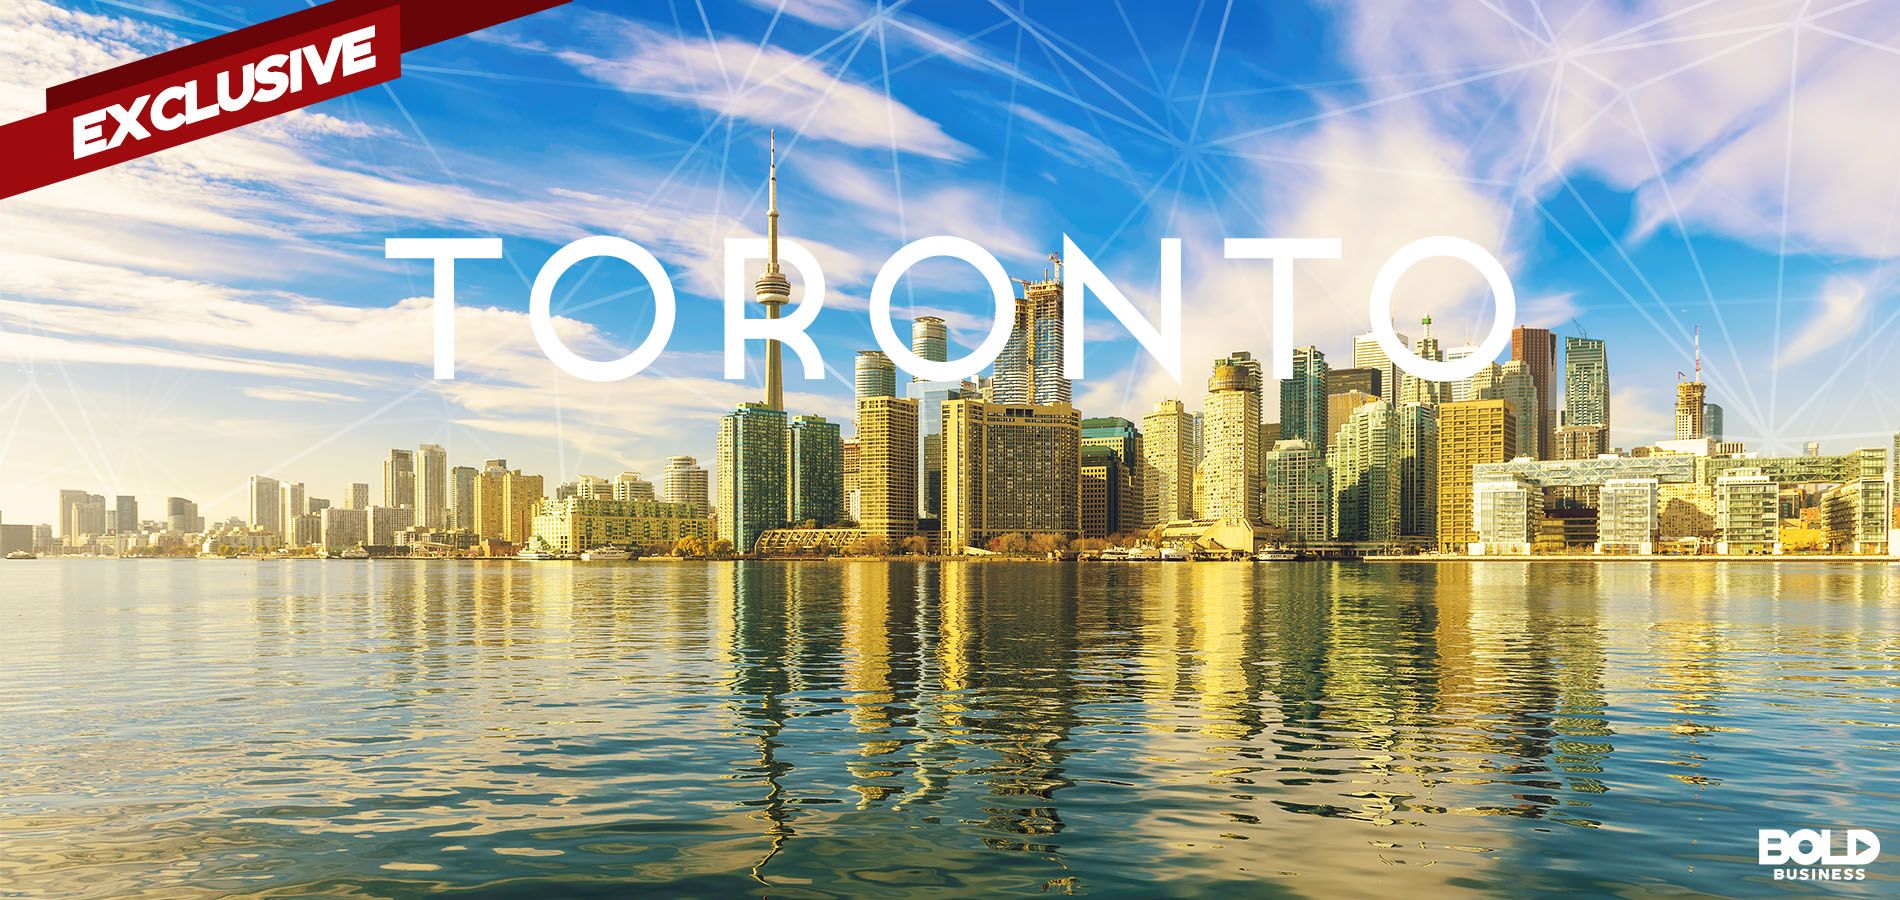 Toronto superimposed on an image of the city skyline